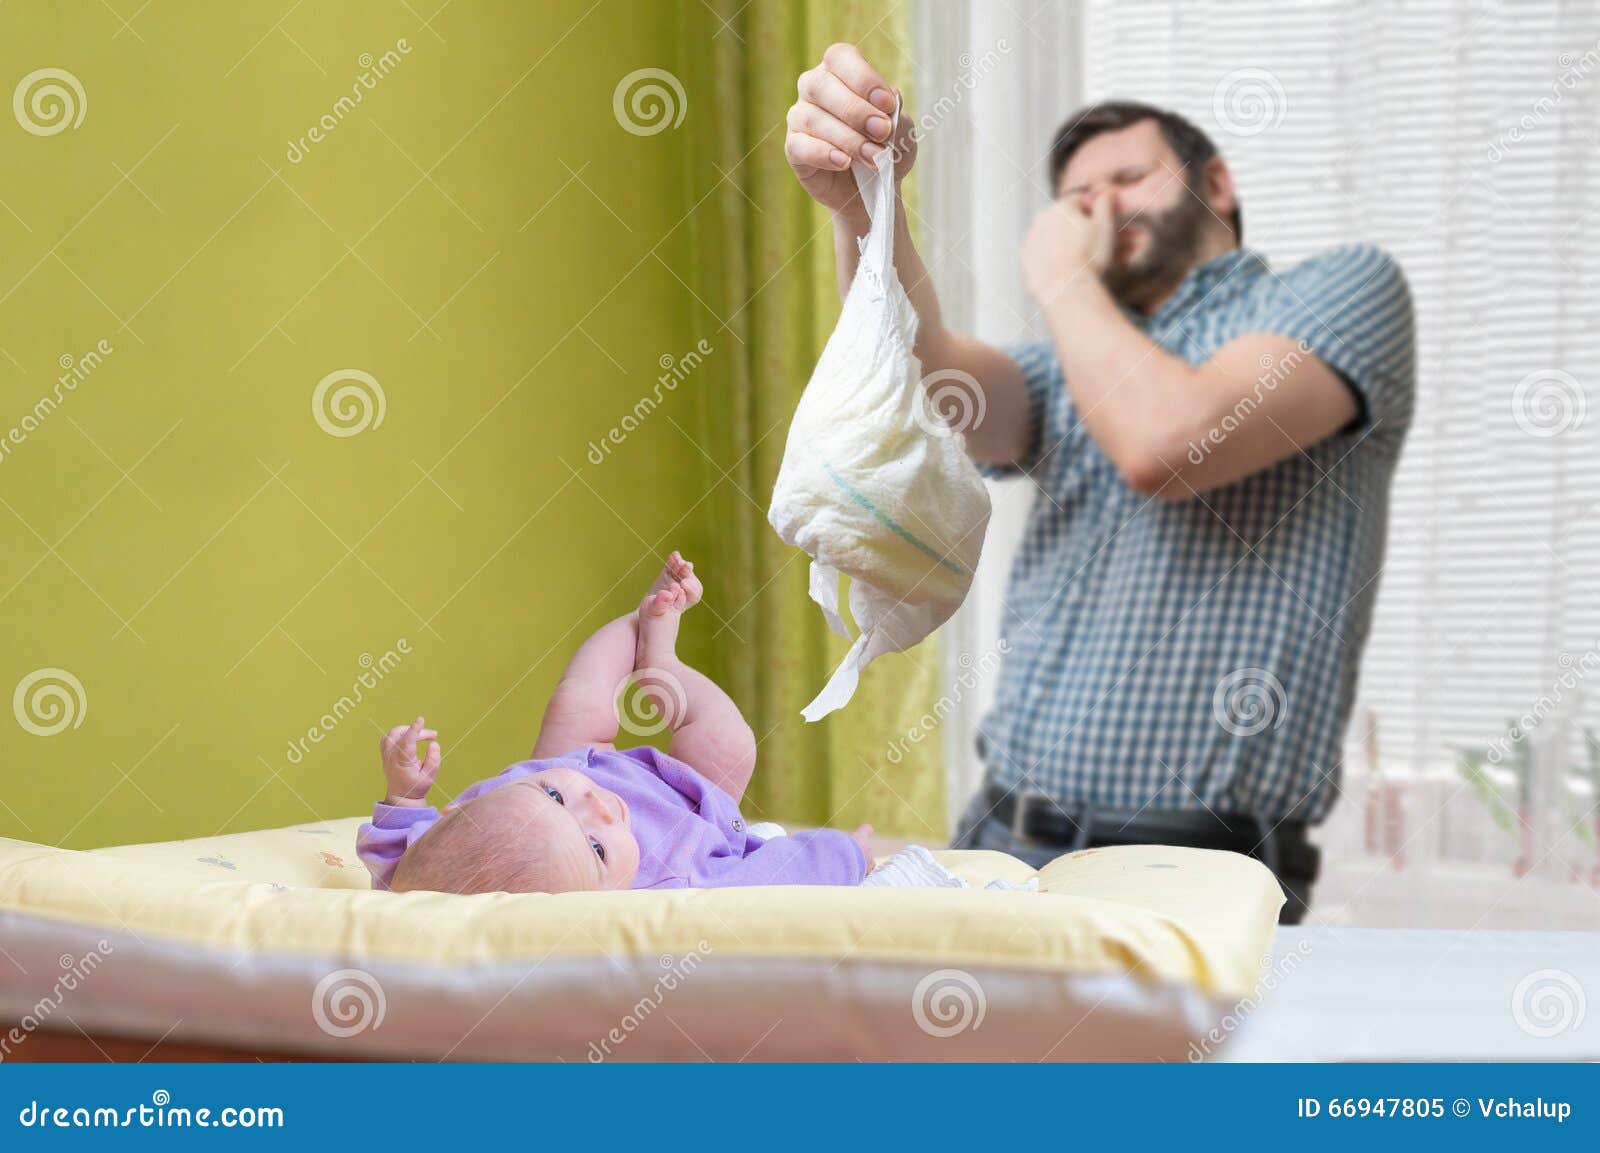 baby care concept. father od dad is changing stinky diaper